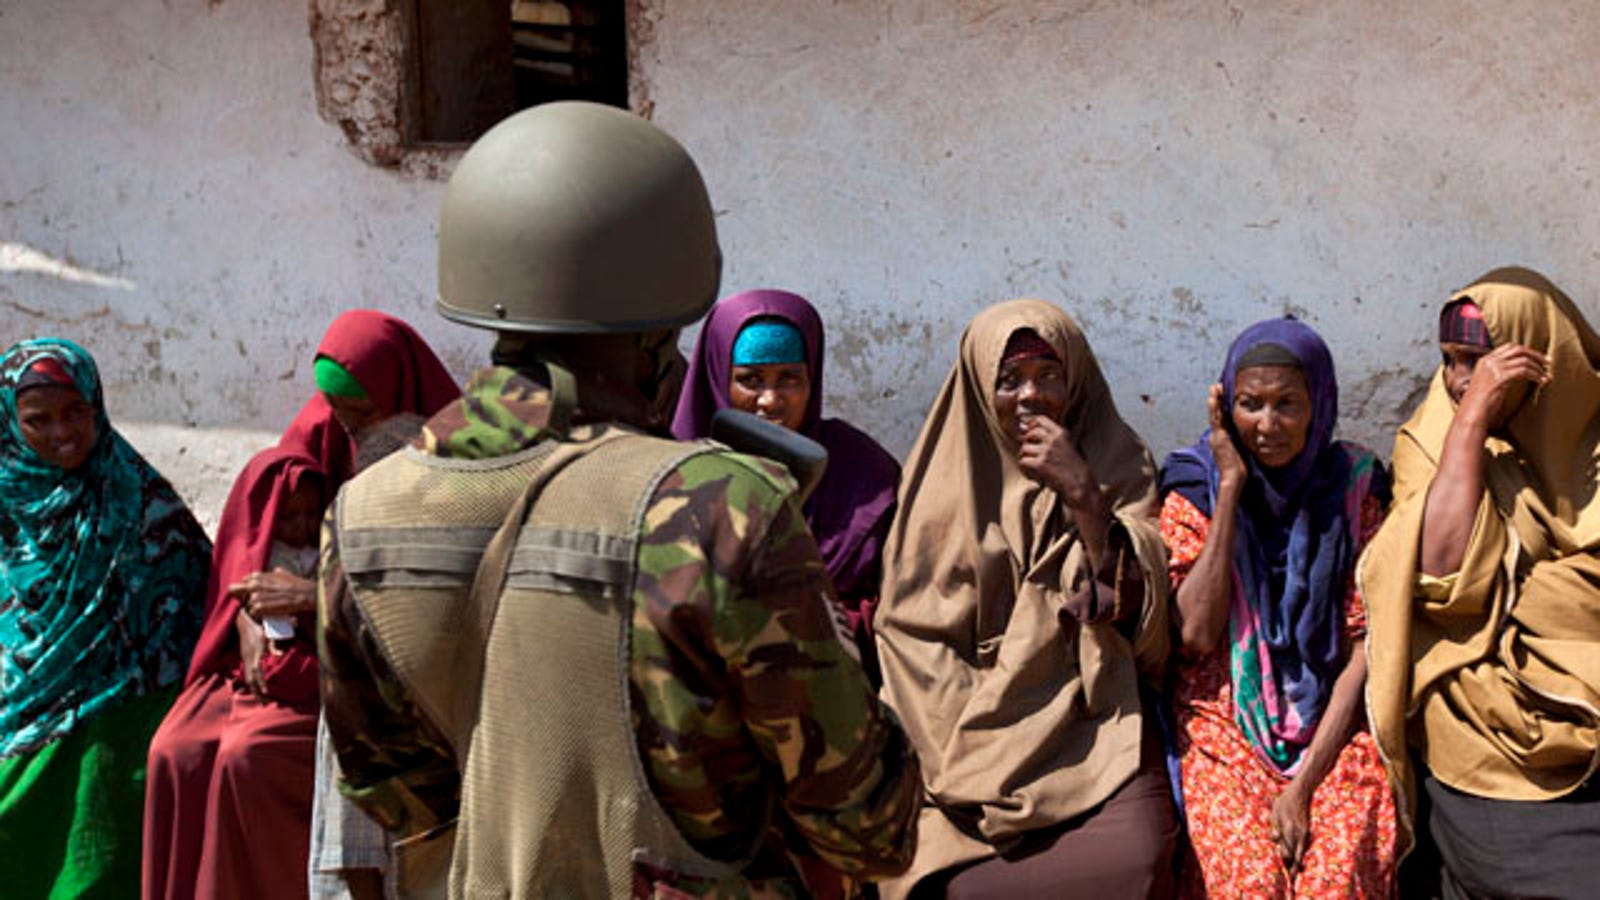 Sexual Violence Against Women Soars In Somalia 0112